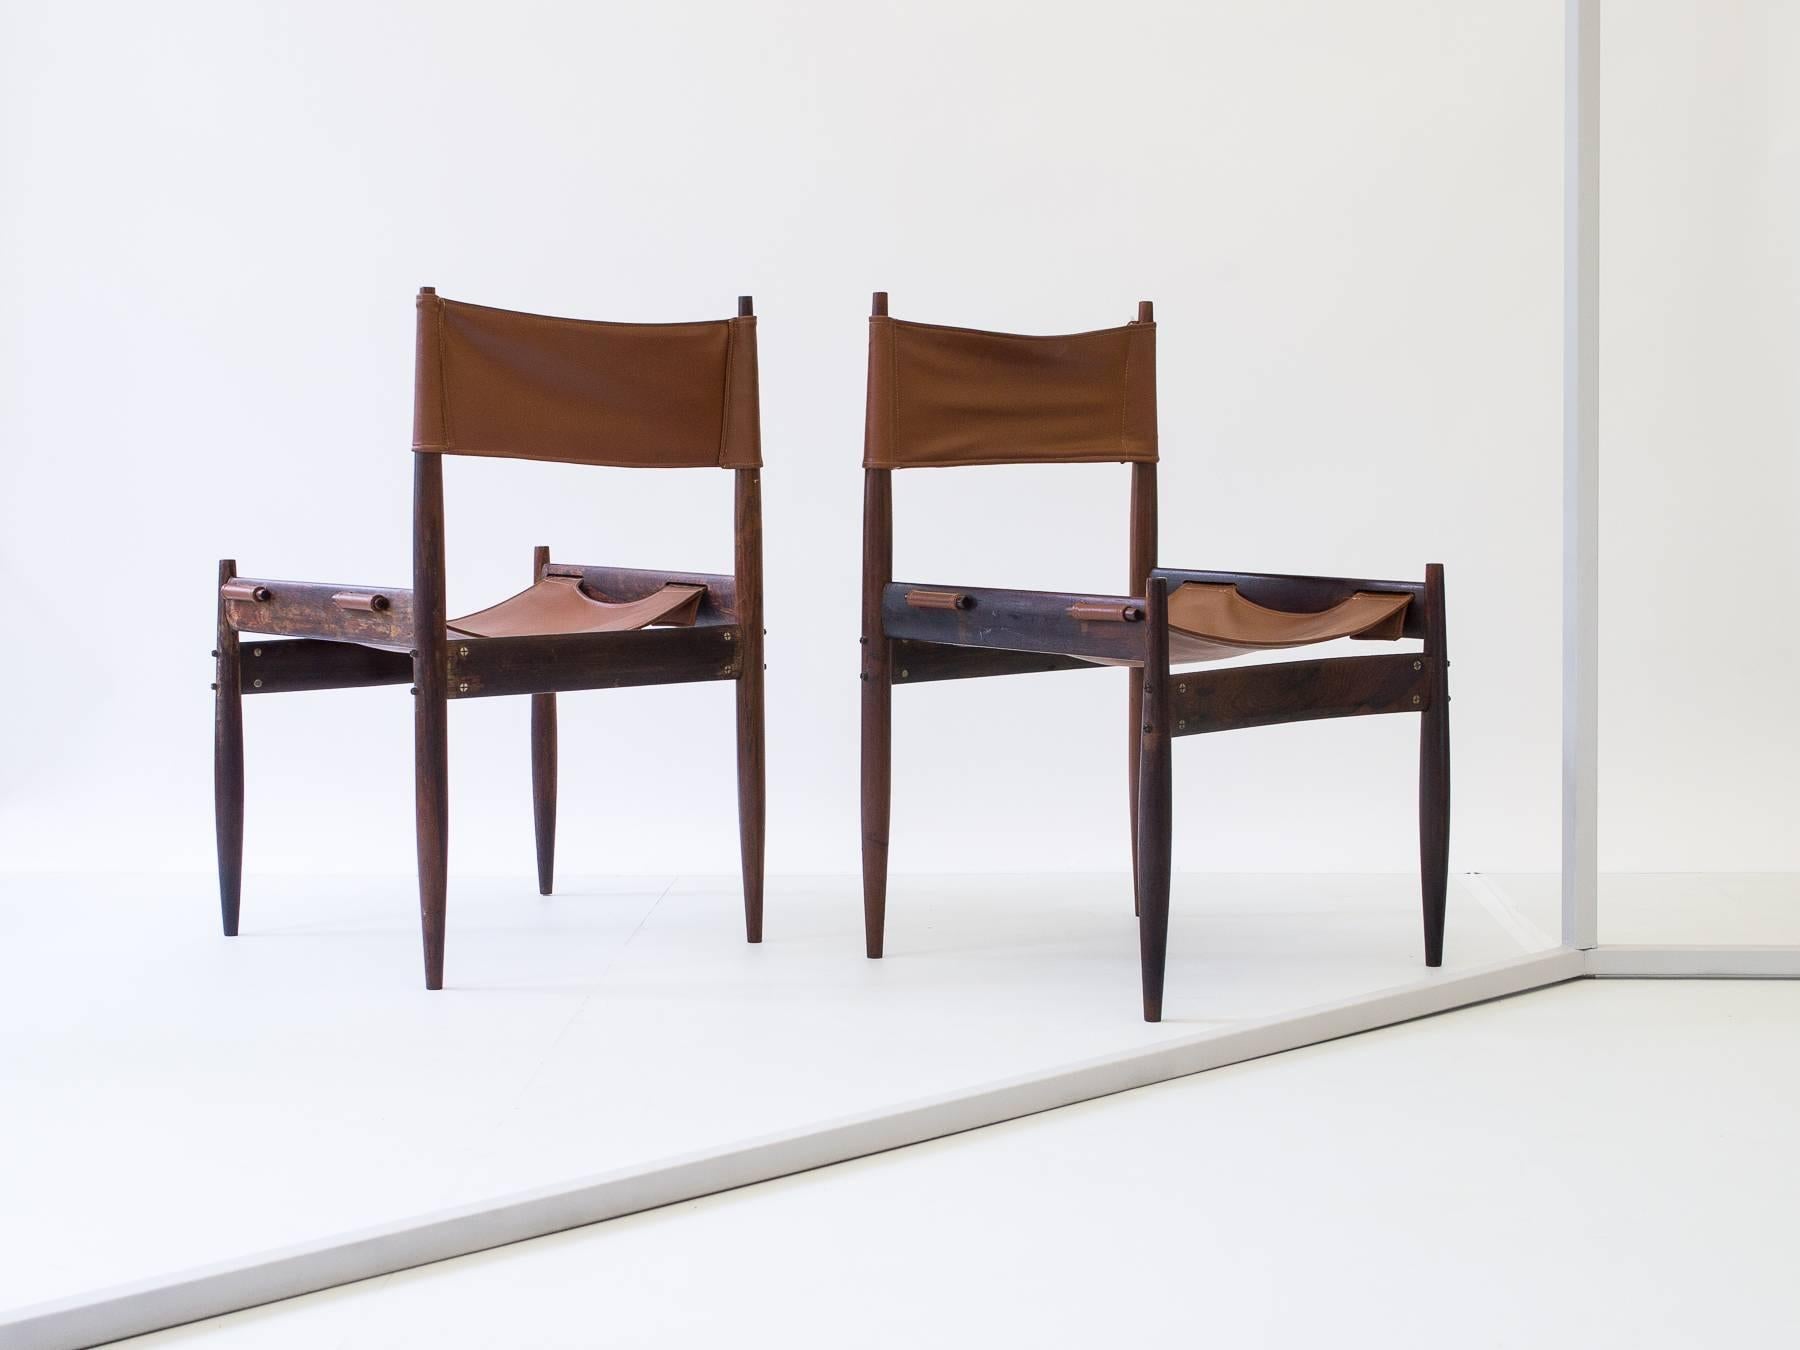 Rare and amazing set of six Jockey chairs by Jorge Zalszupin. The set has the wood in original conditions, but seat and backs have been changed by previous owner. Price includes full restoration. Acquired from Ina Zalszupin's estate. Ina is Jorge's